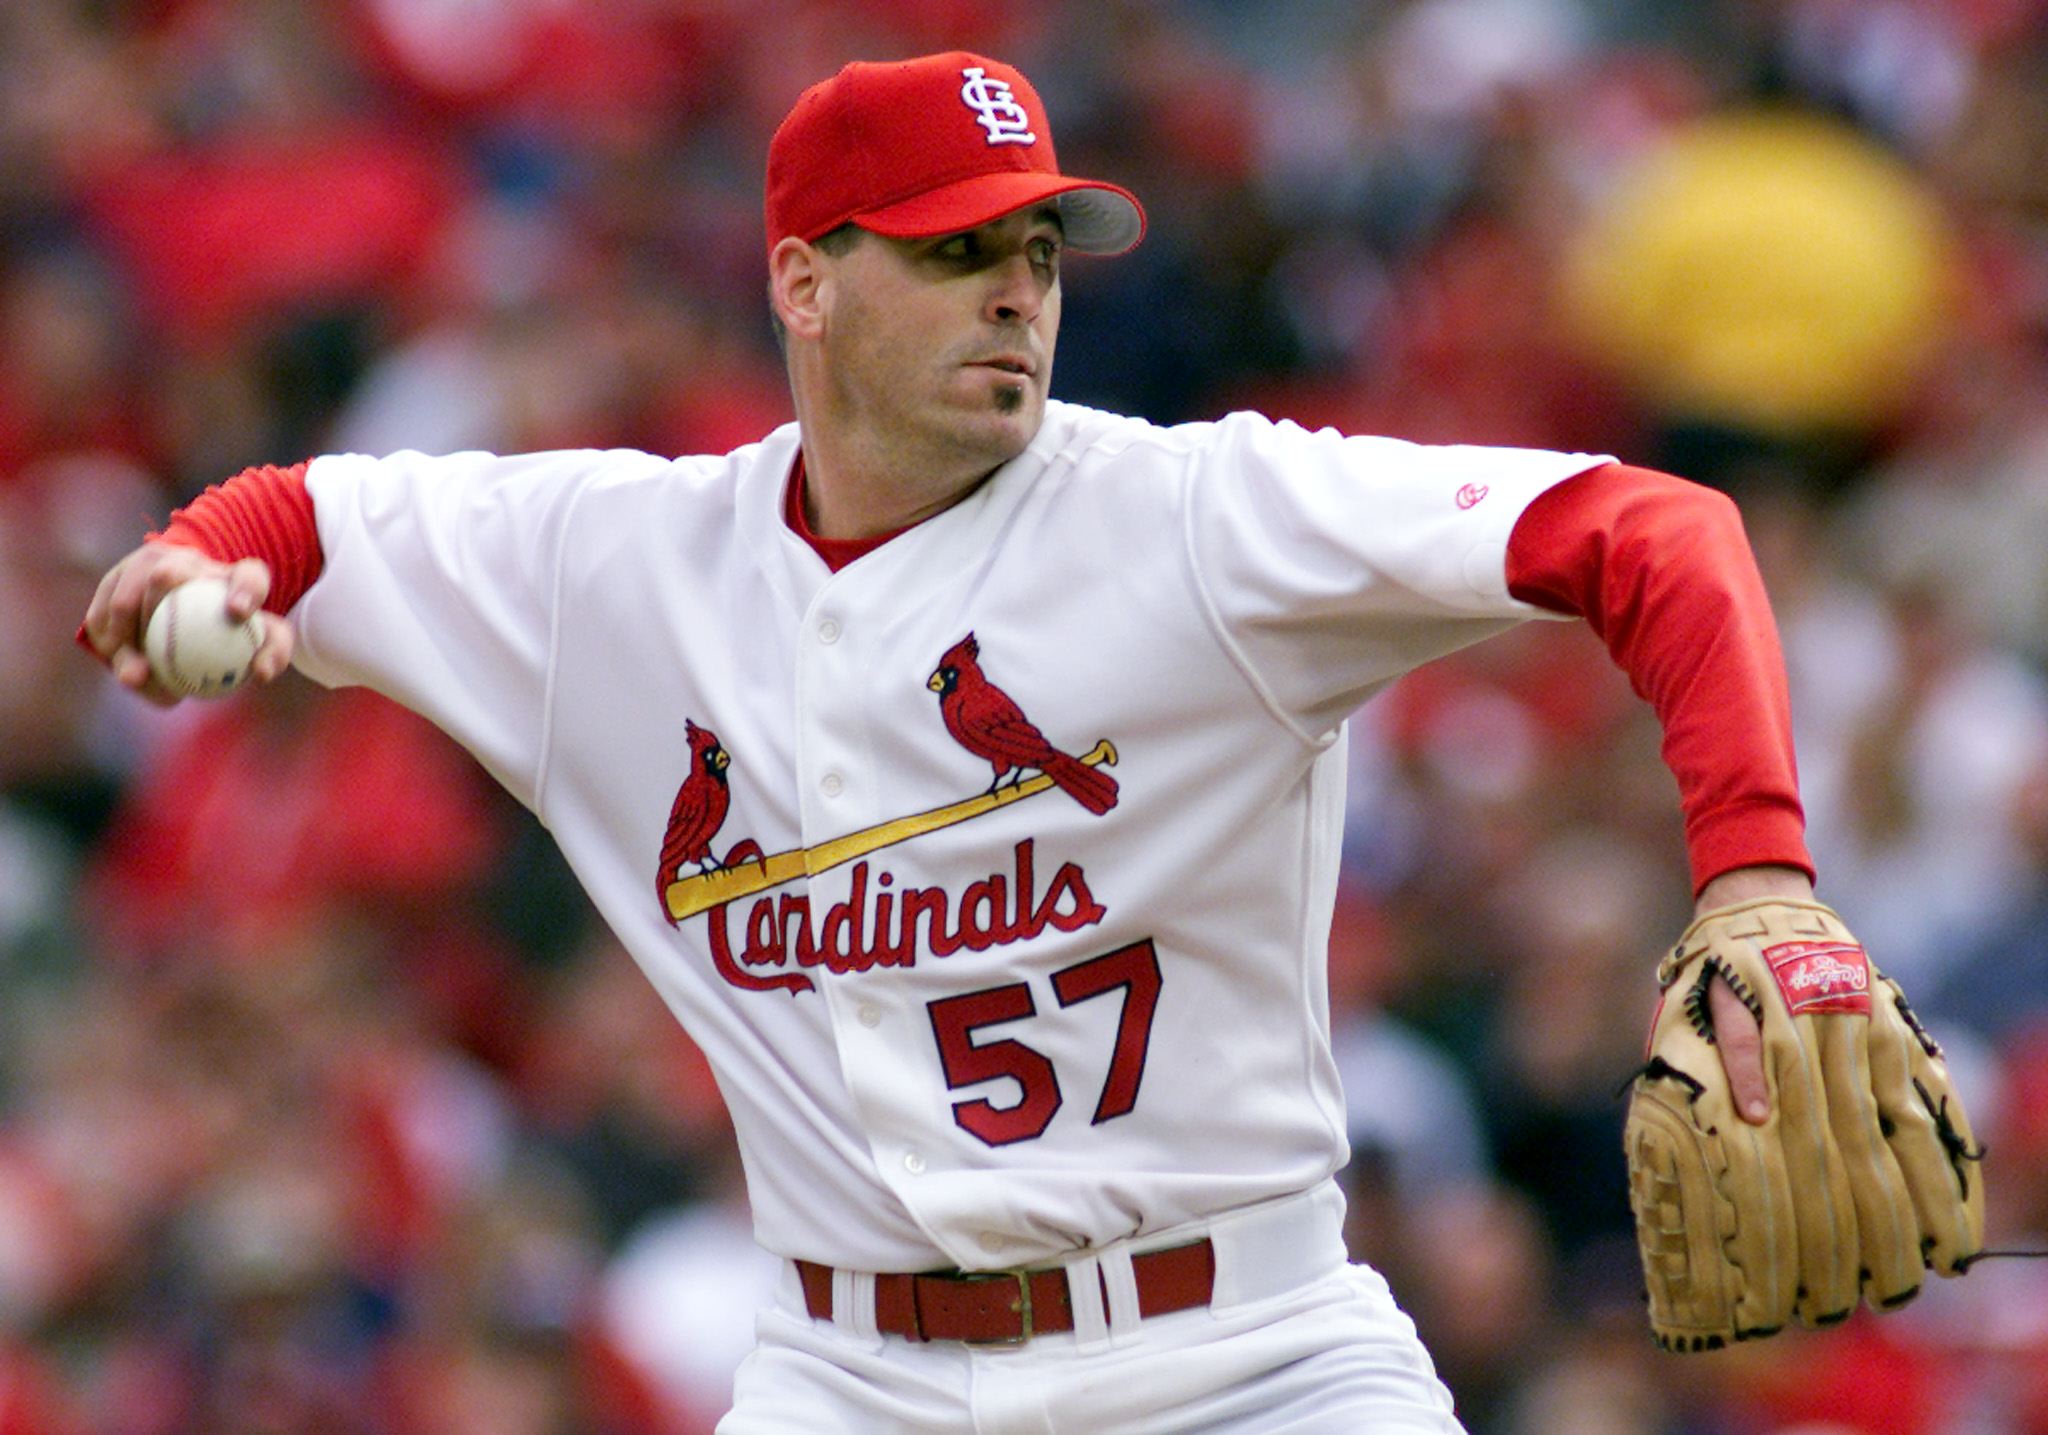 Darryl Kile threw a no-hitter and made three All-Star games in his career, but he tragically passed away in 2002 at the age of 33.